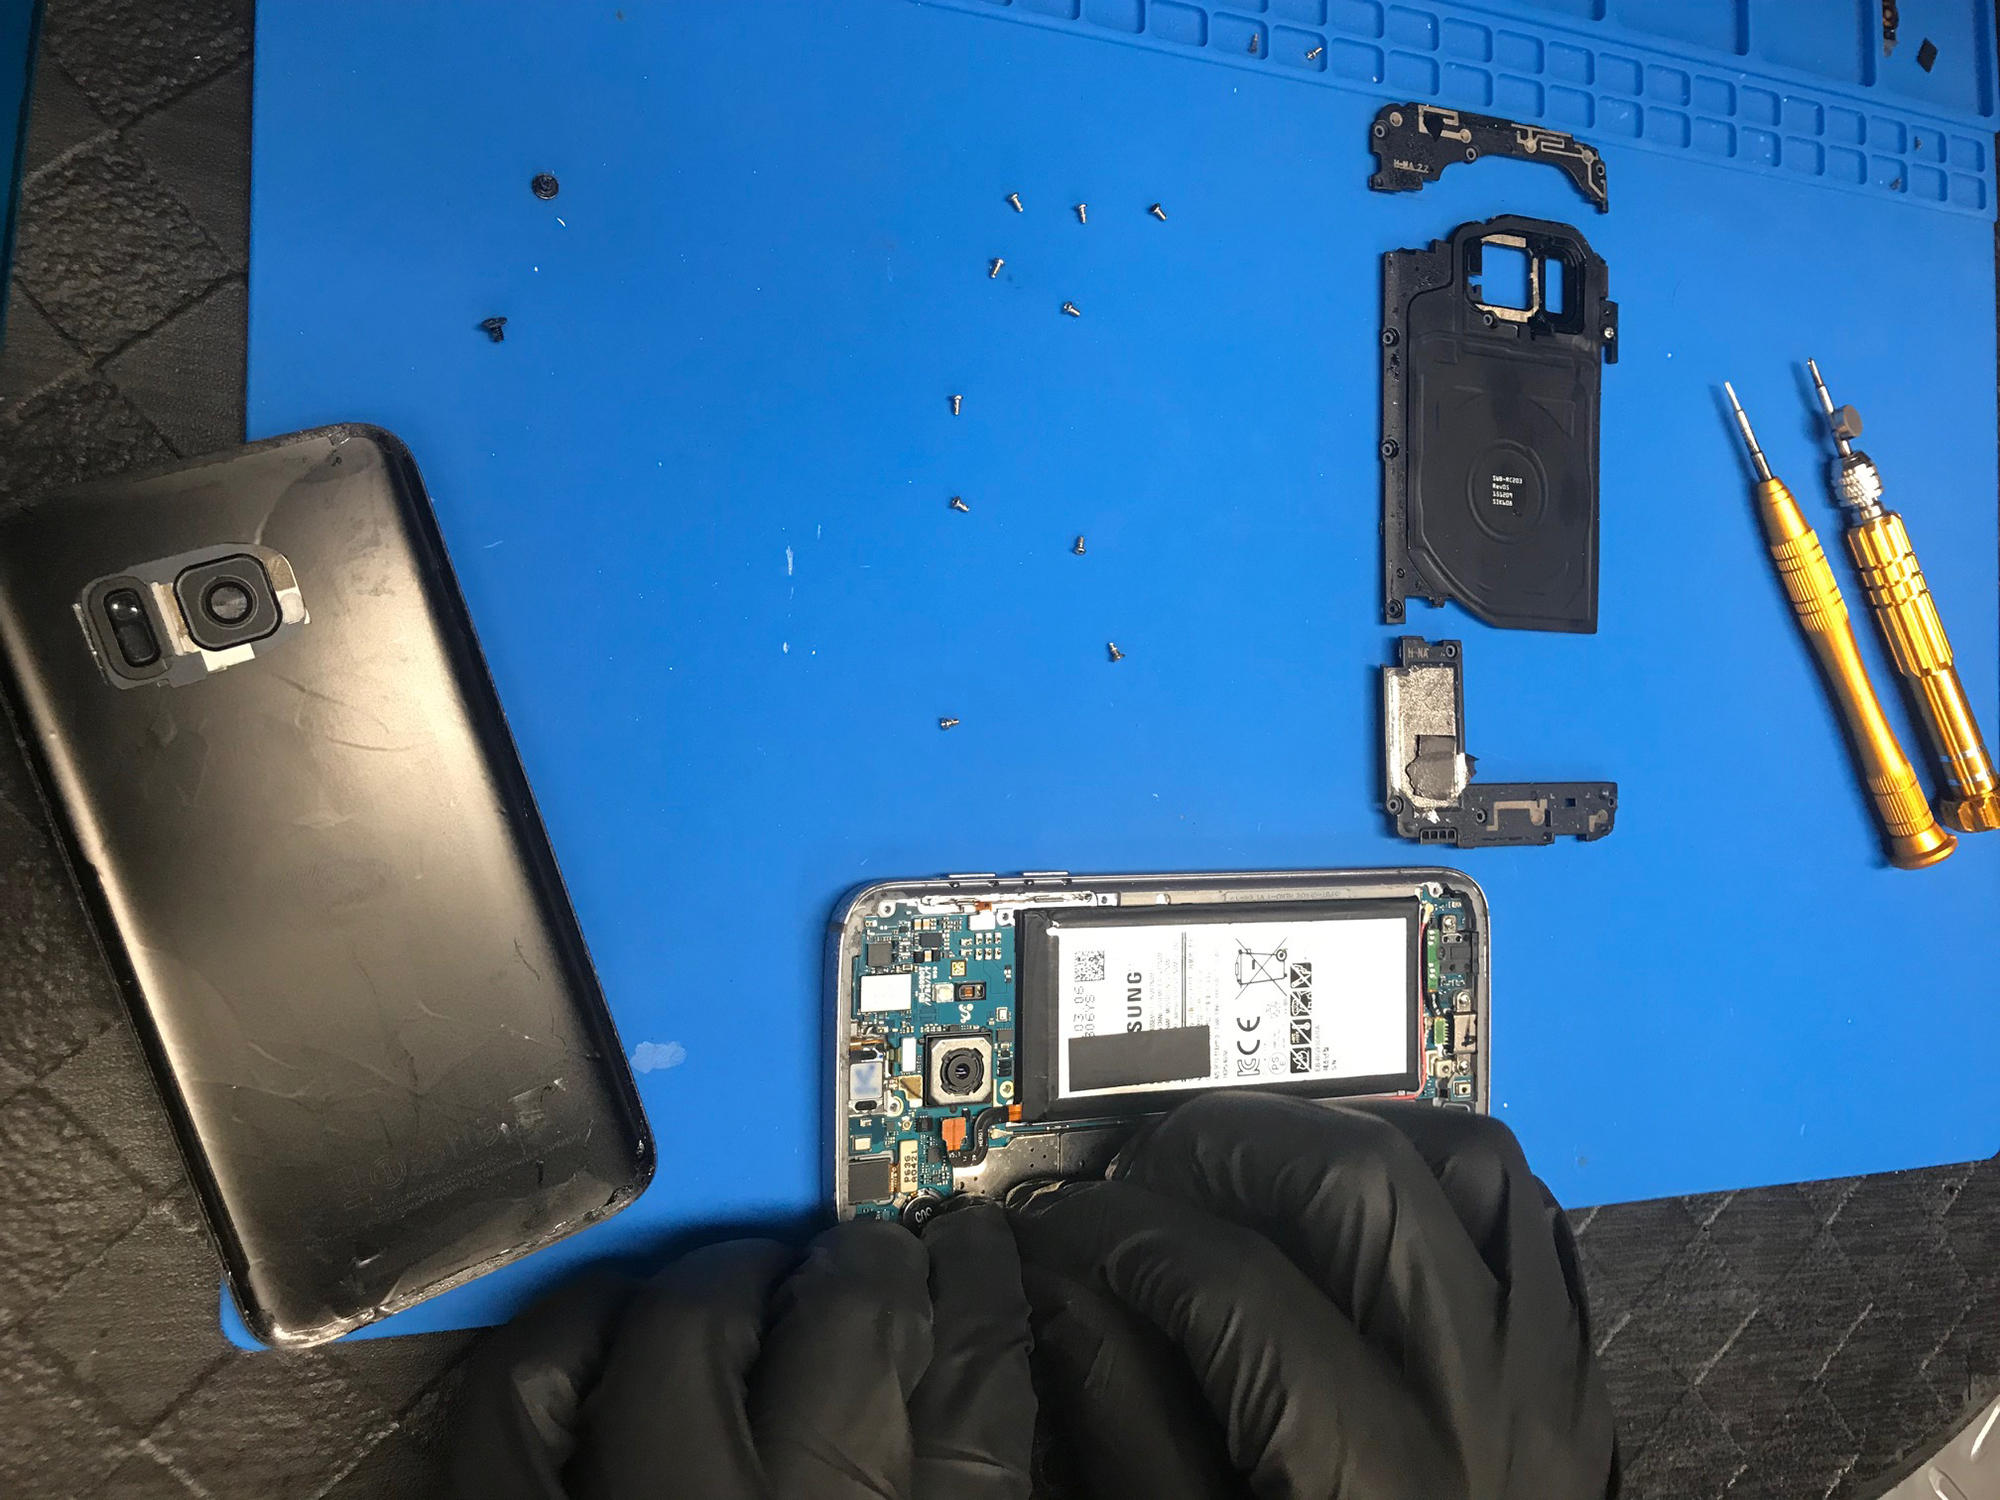 CPR Cell Phone Repair Winter Haven Photo